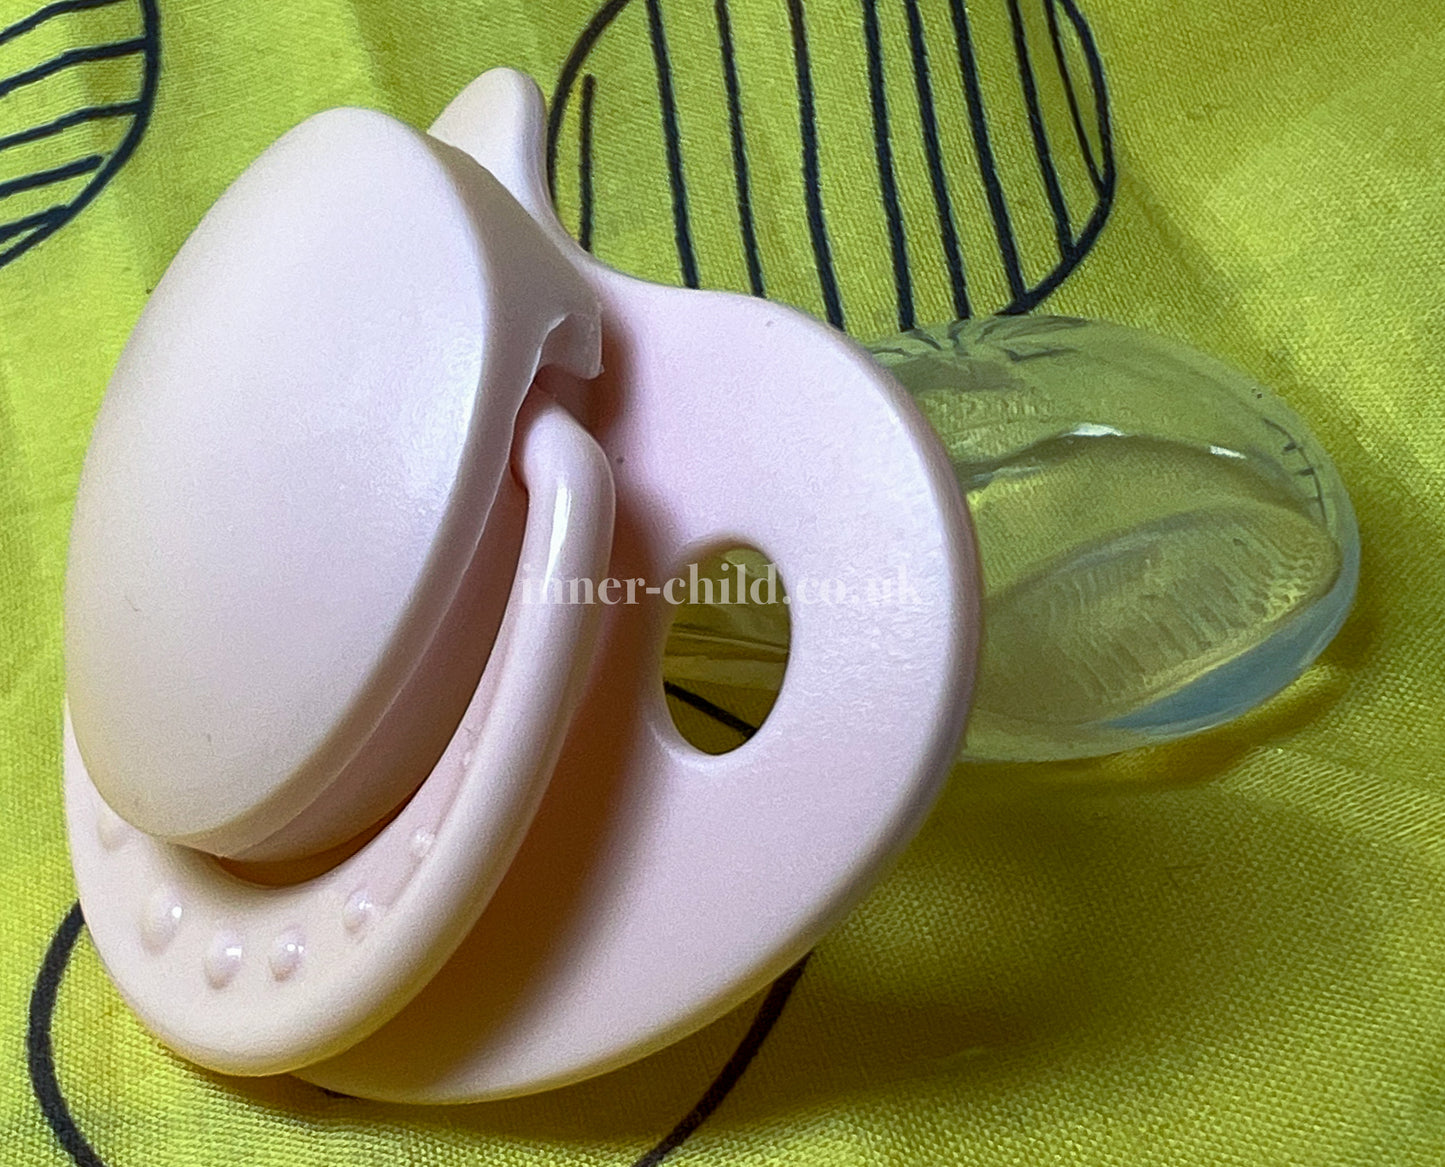 Plain Baby Pink Pacifier